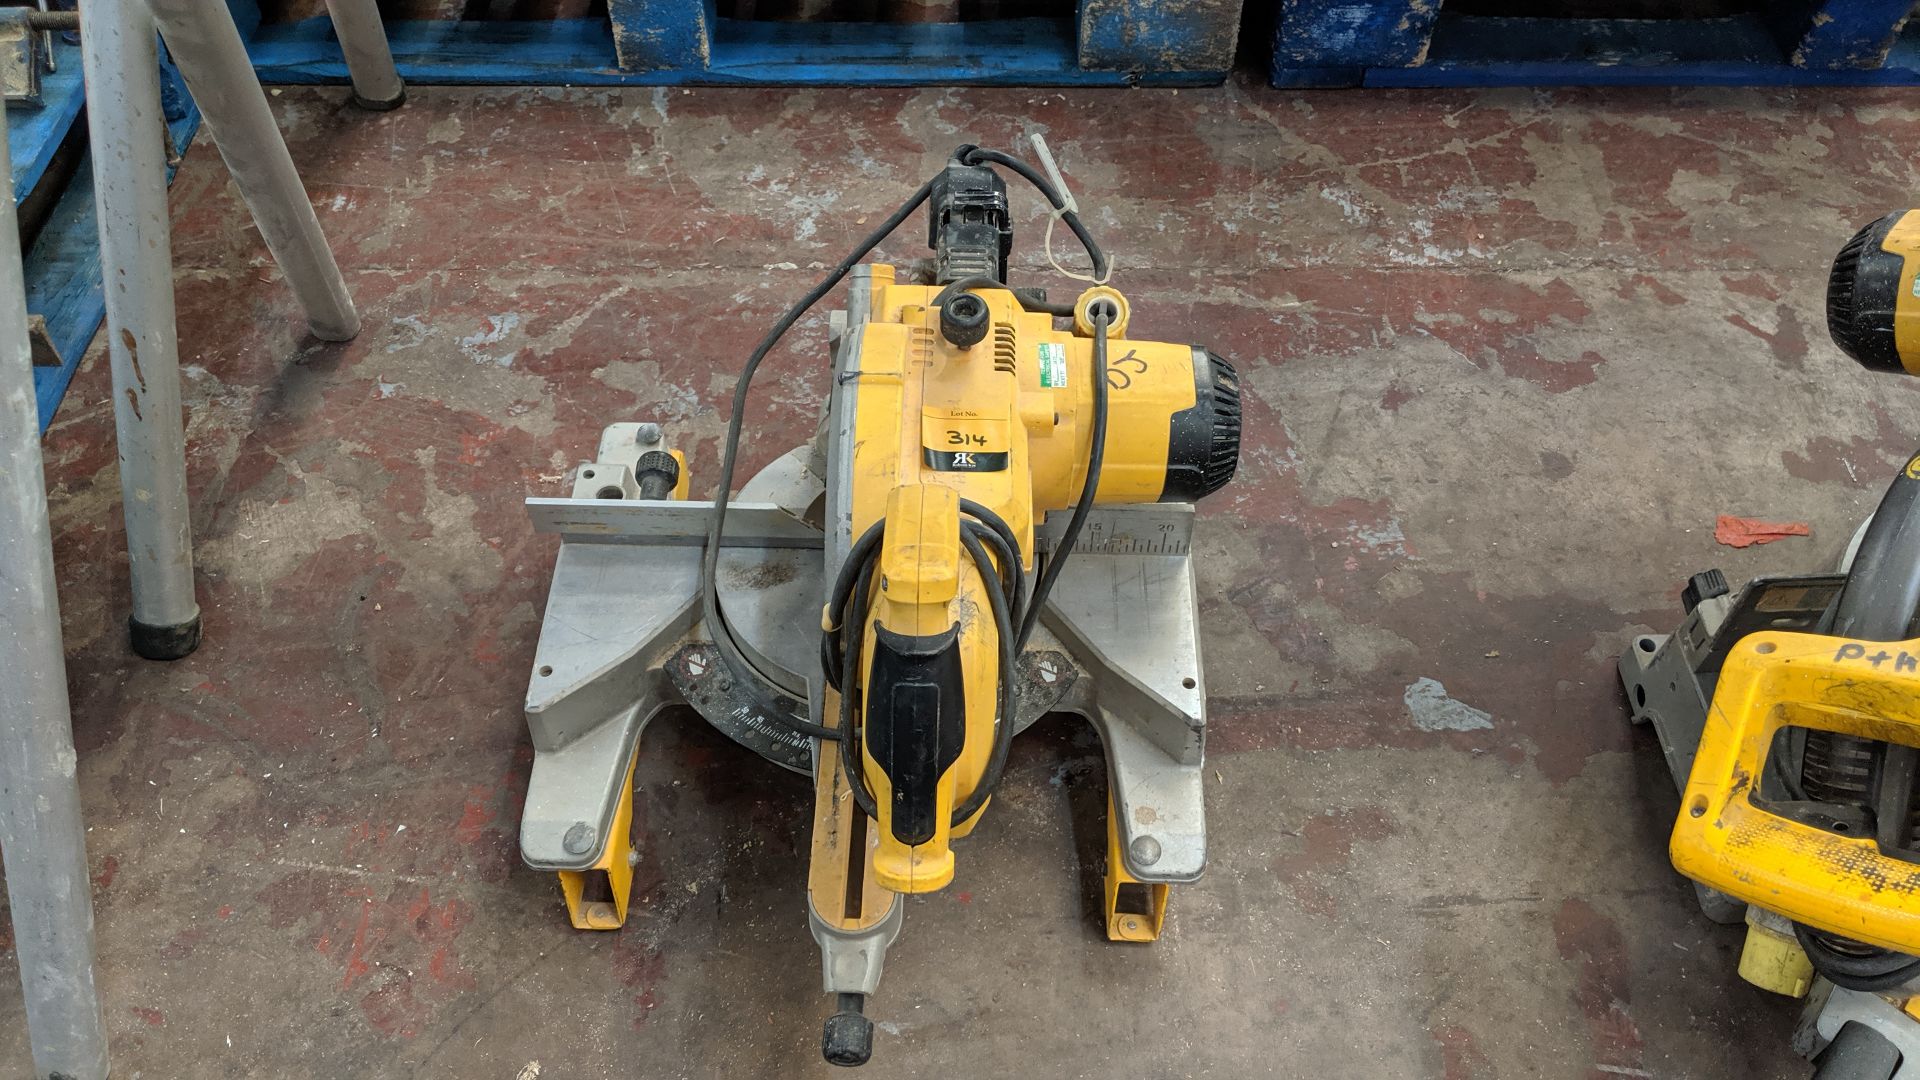 DeWalt 110V DW777-LX mitre saw IMPORTANT: Please remember goods successfully bid upon must be paid